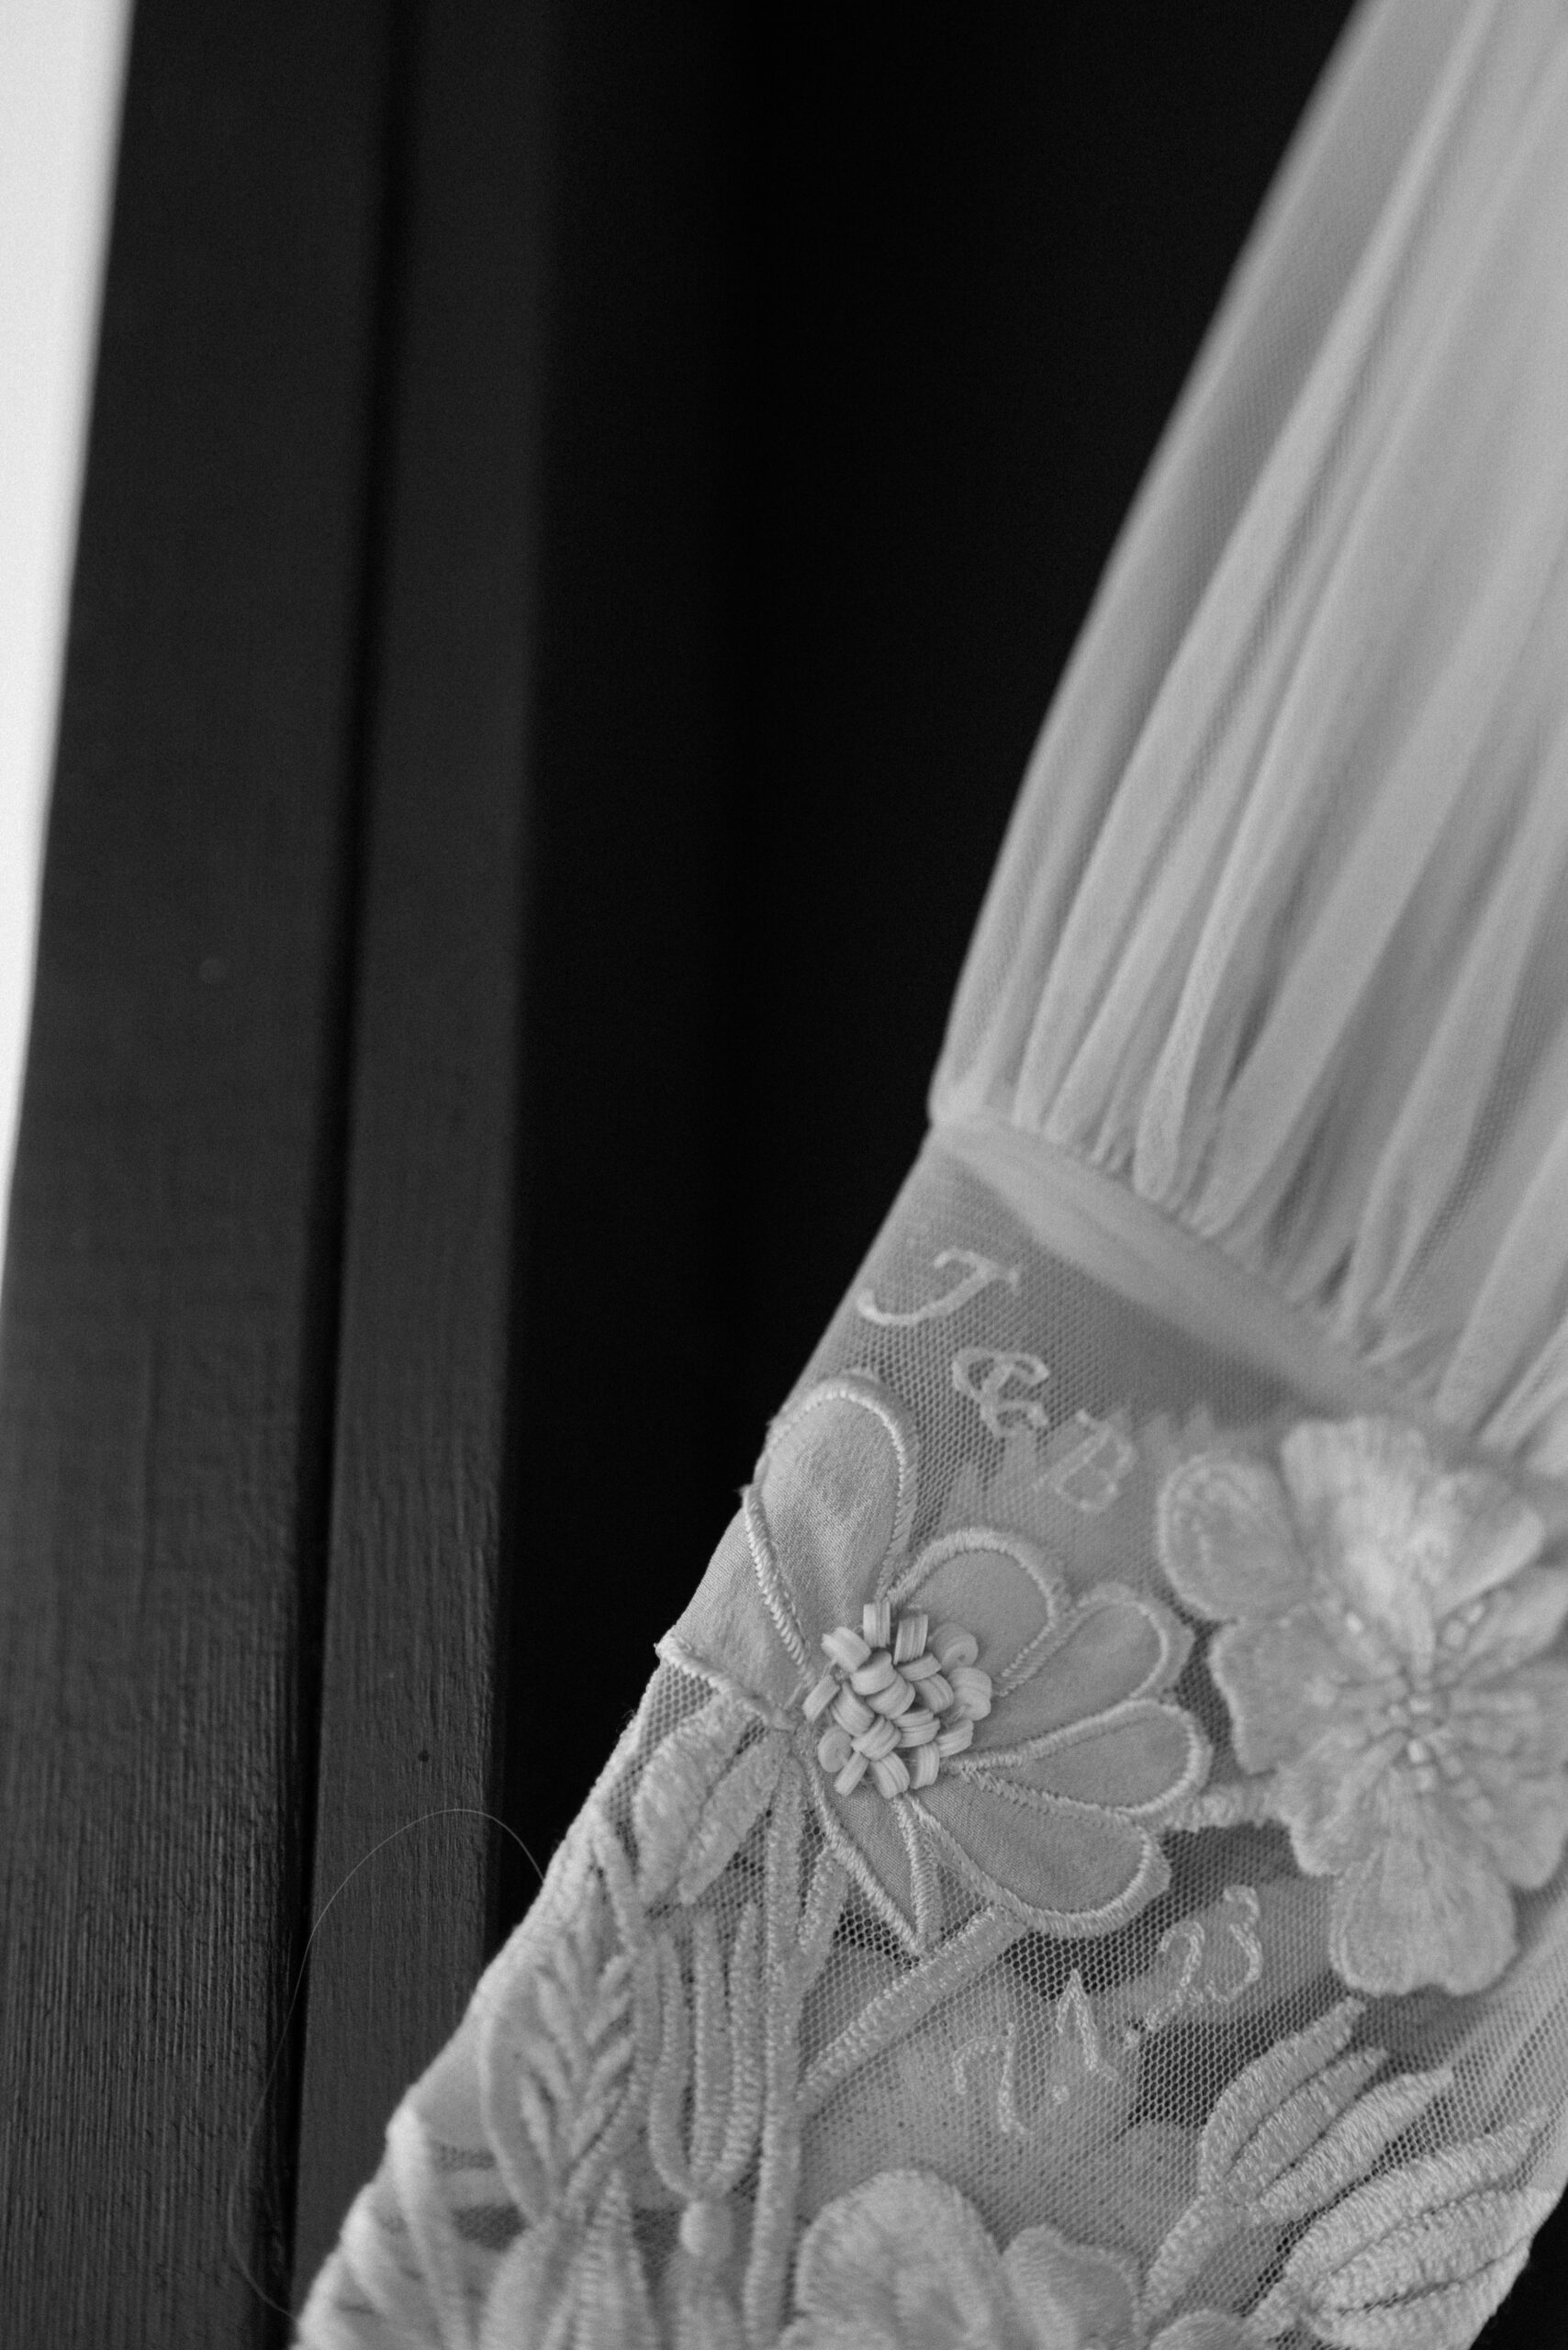 A black and white photo of the embroidery details of a bride's wedding dress. A black and white photo of wedding details for Jessica and Bernards wedding at Three Peaks Ranch. Photo by Ashley Joyce.